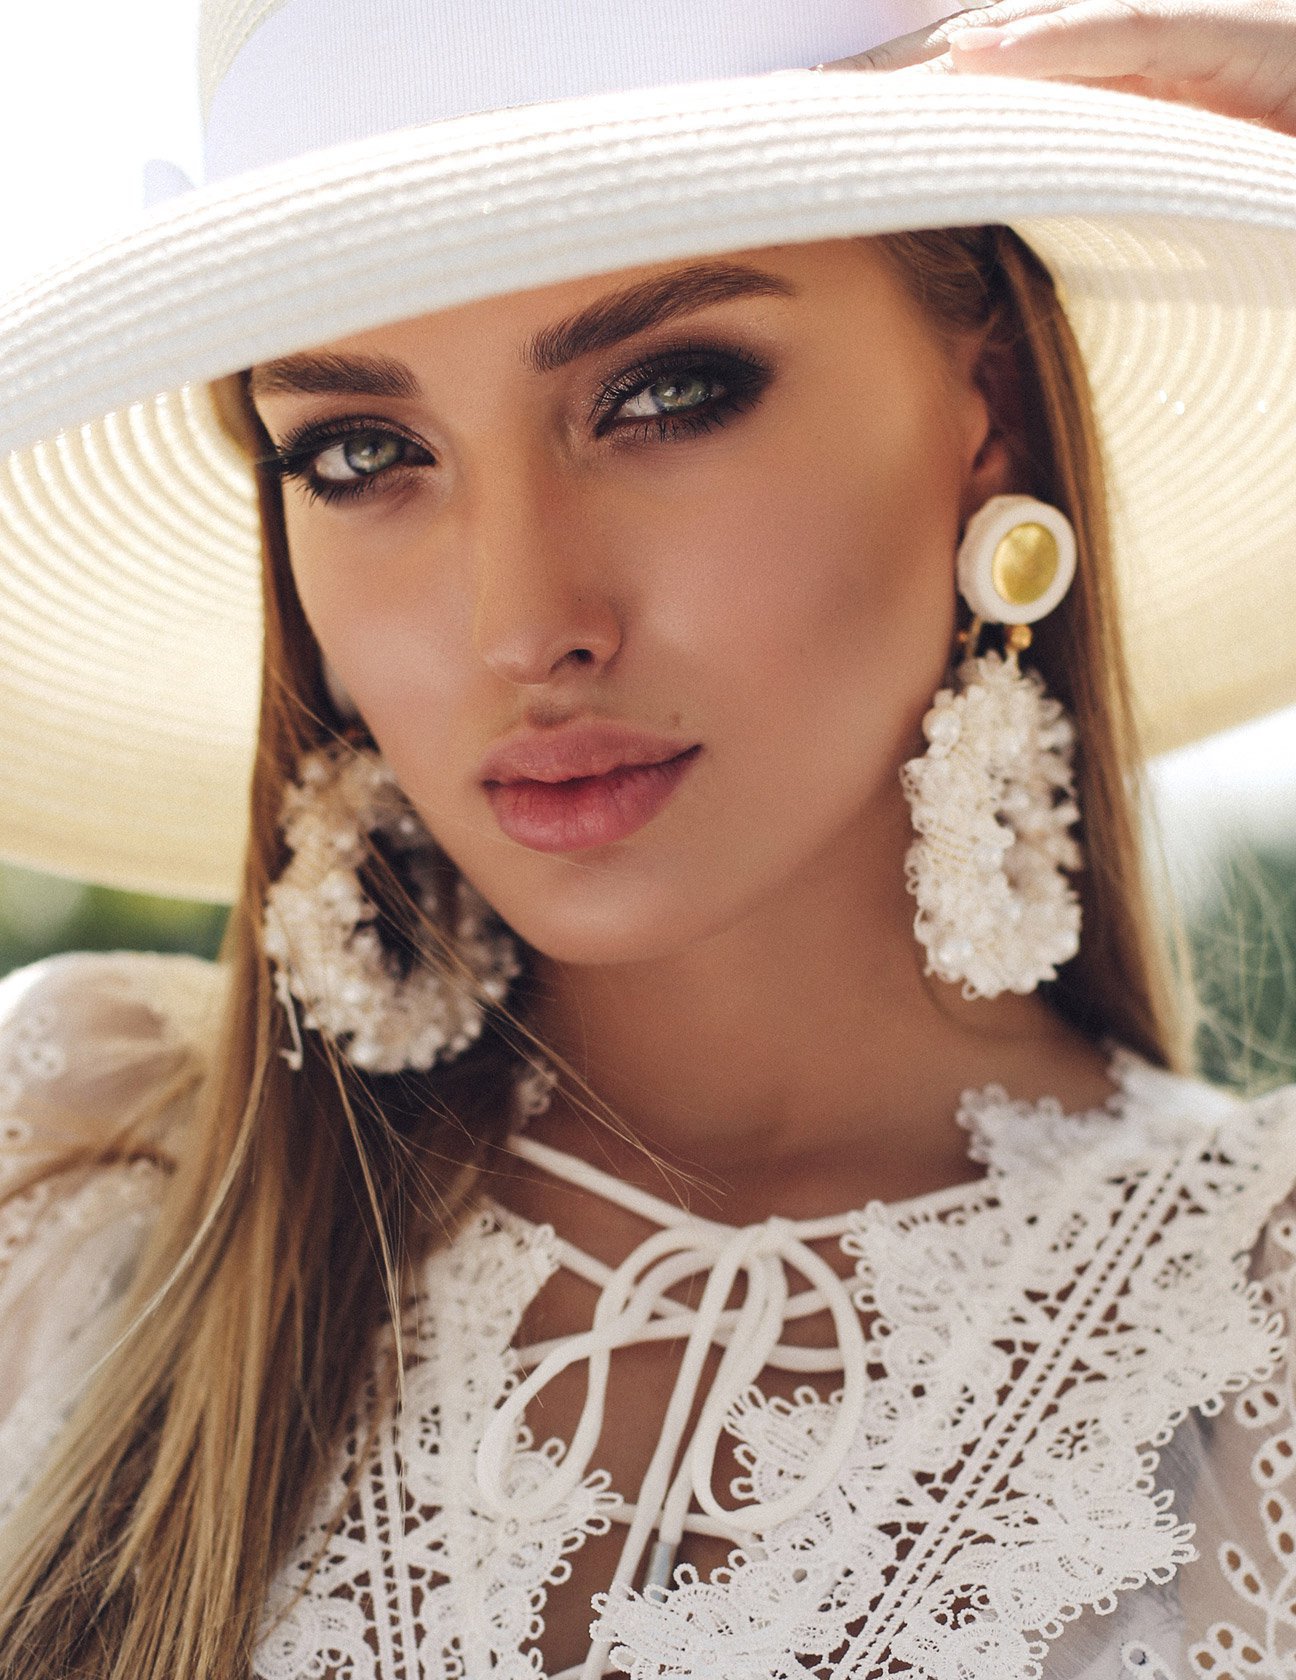 septorhinoplasty patient model in a lacey white top and sunhat